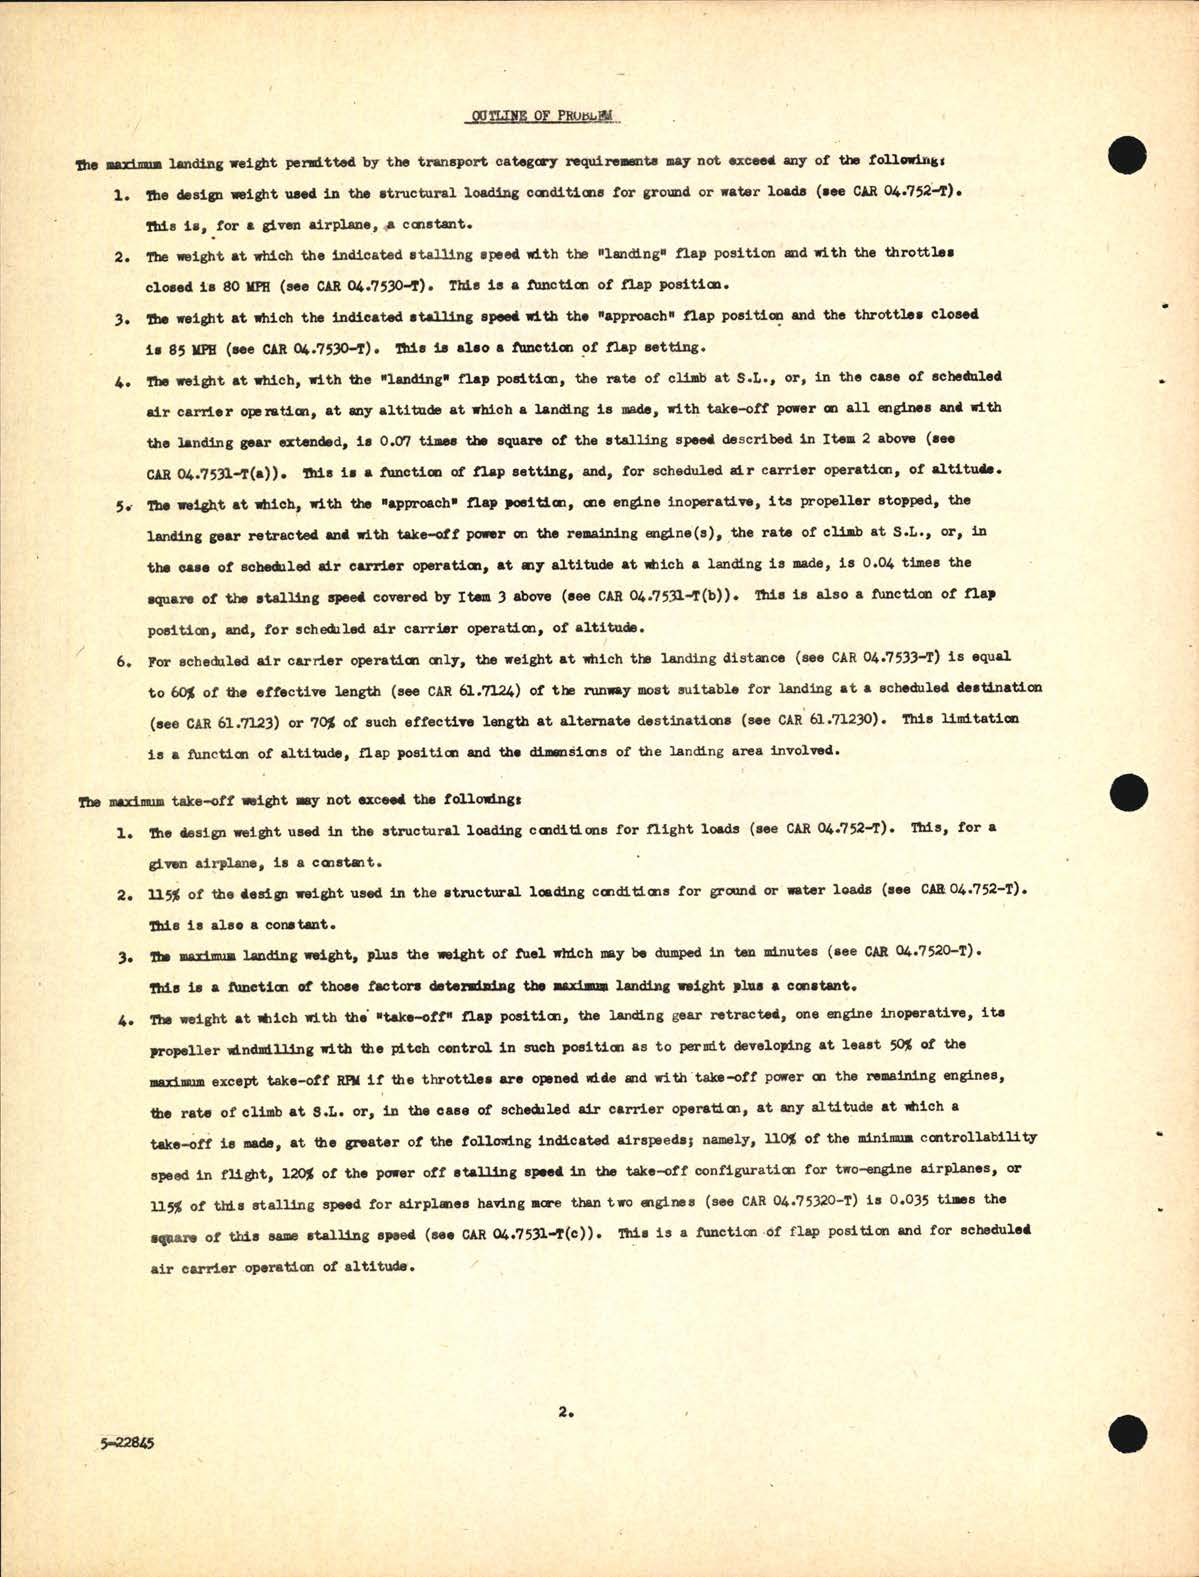 Sample page 8 from AirCorps Library document: A Study to Determine the Maximum Weights Permitted by the Transport Category Requirements for the DC-3